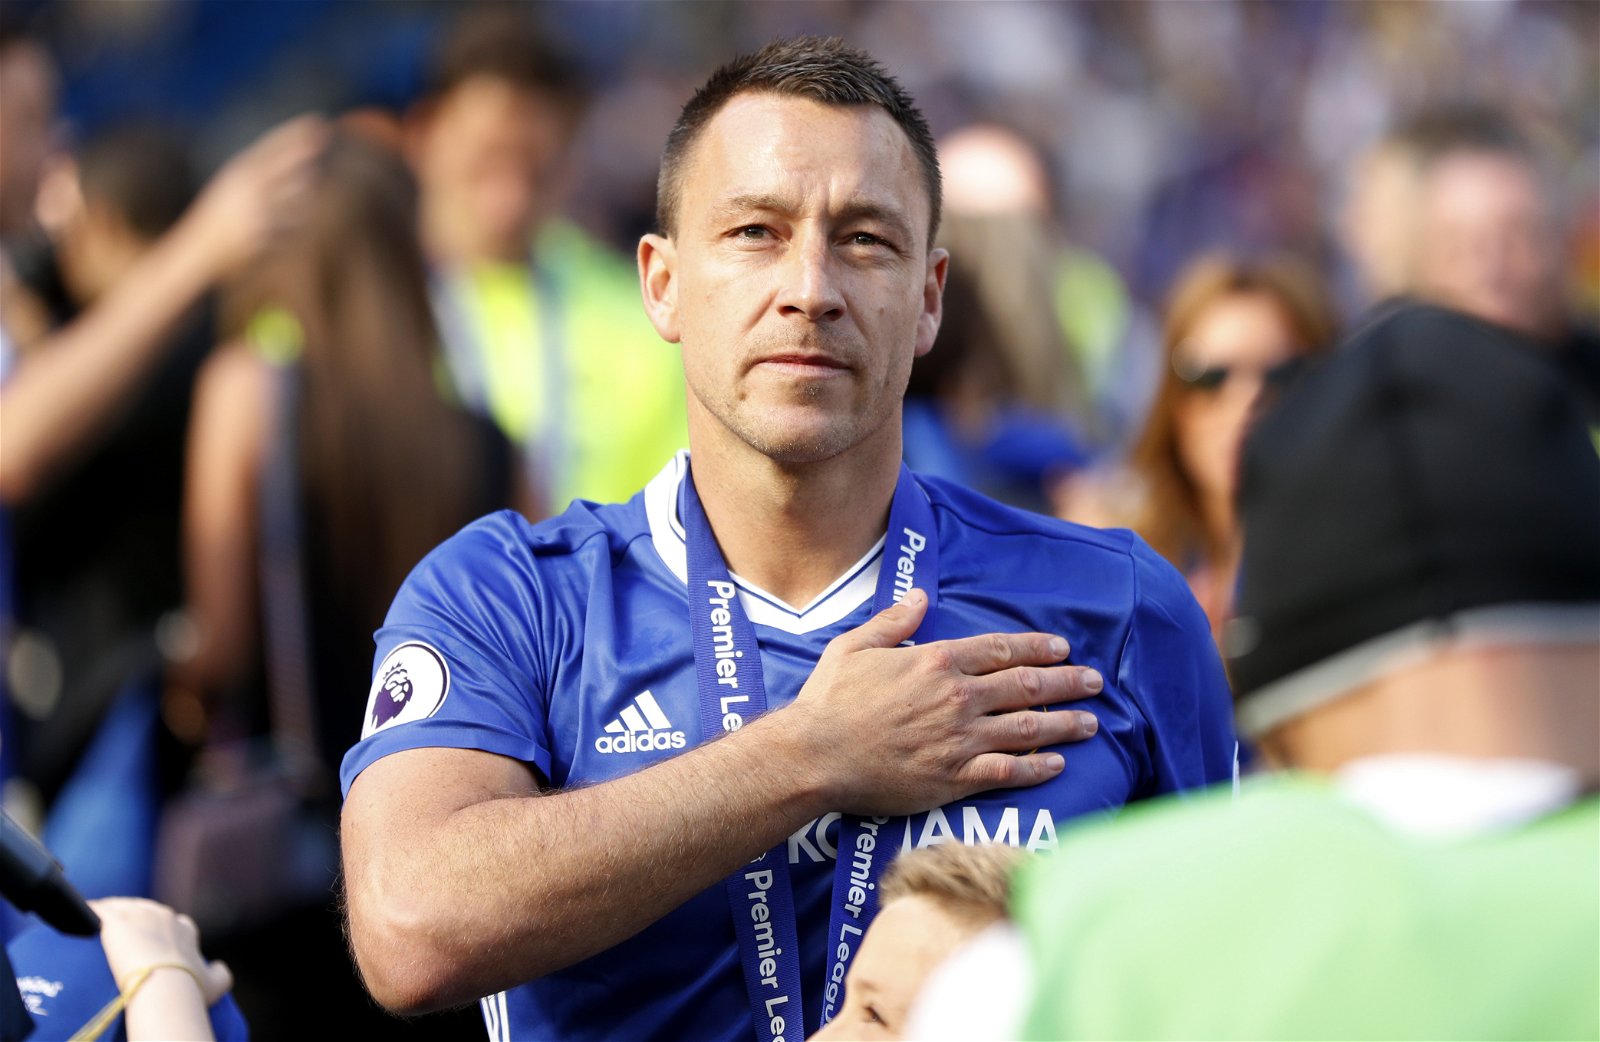 John Terry announces retirement from football